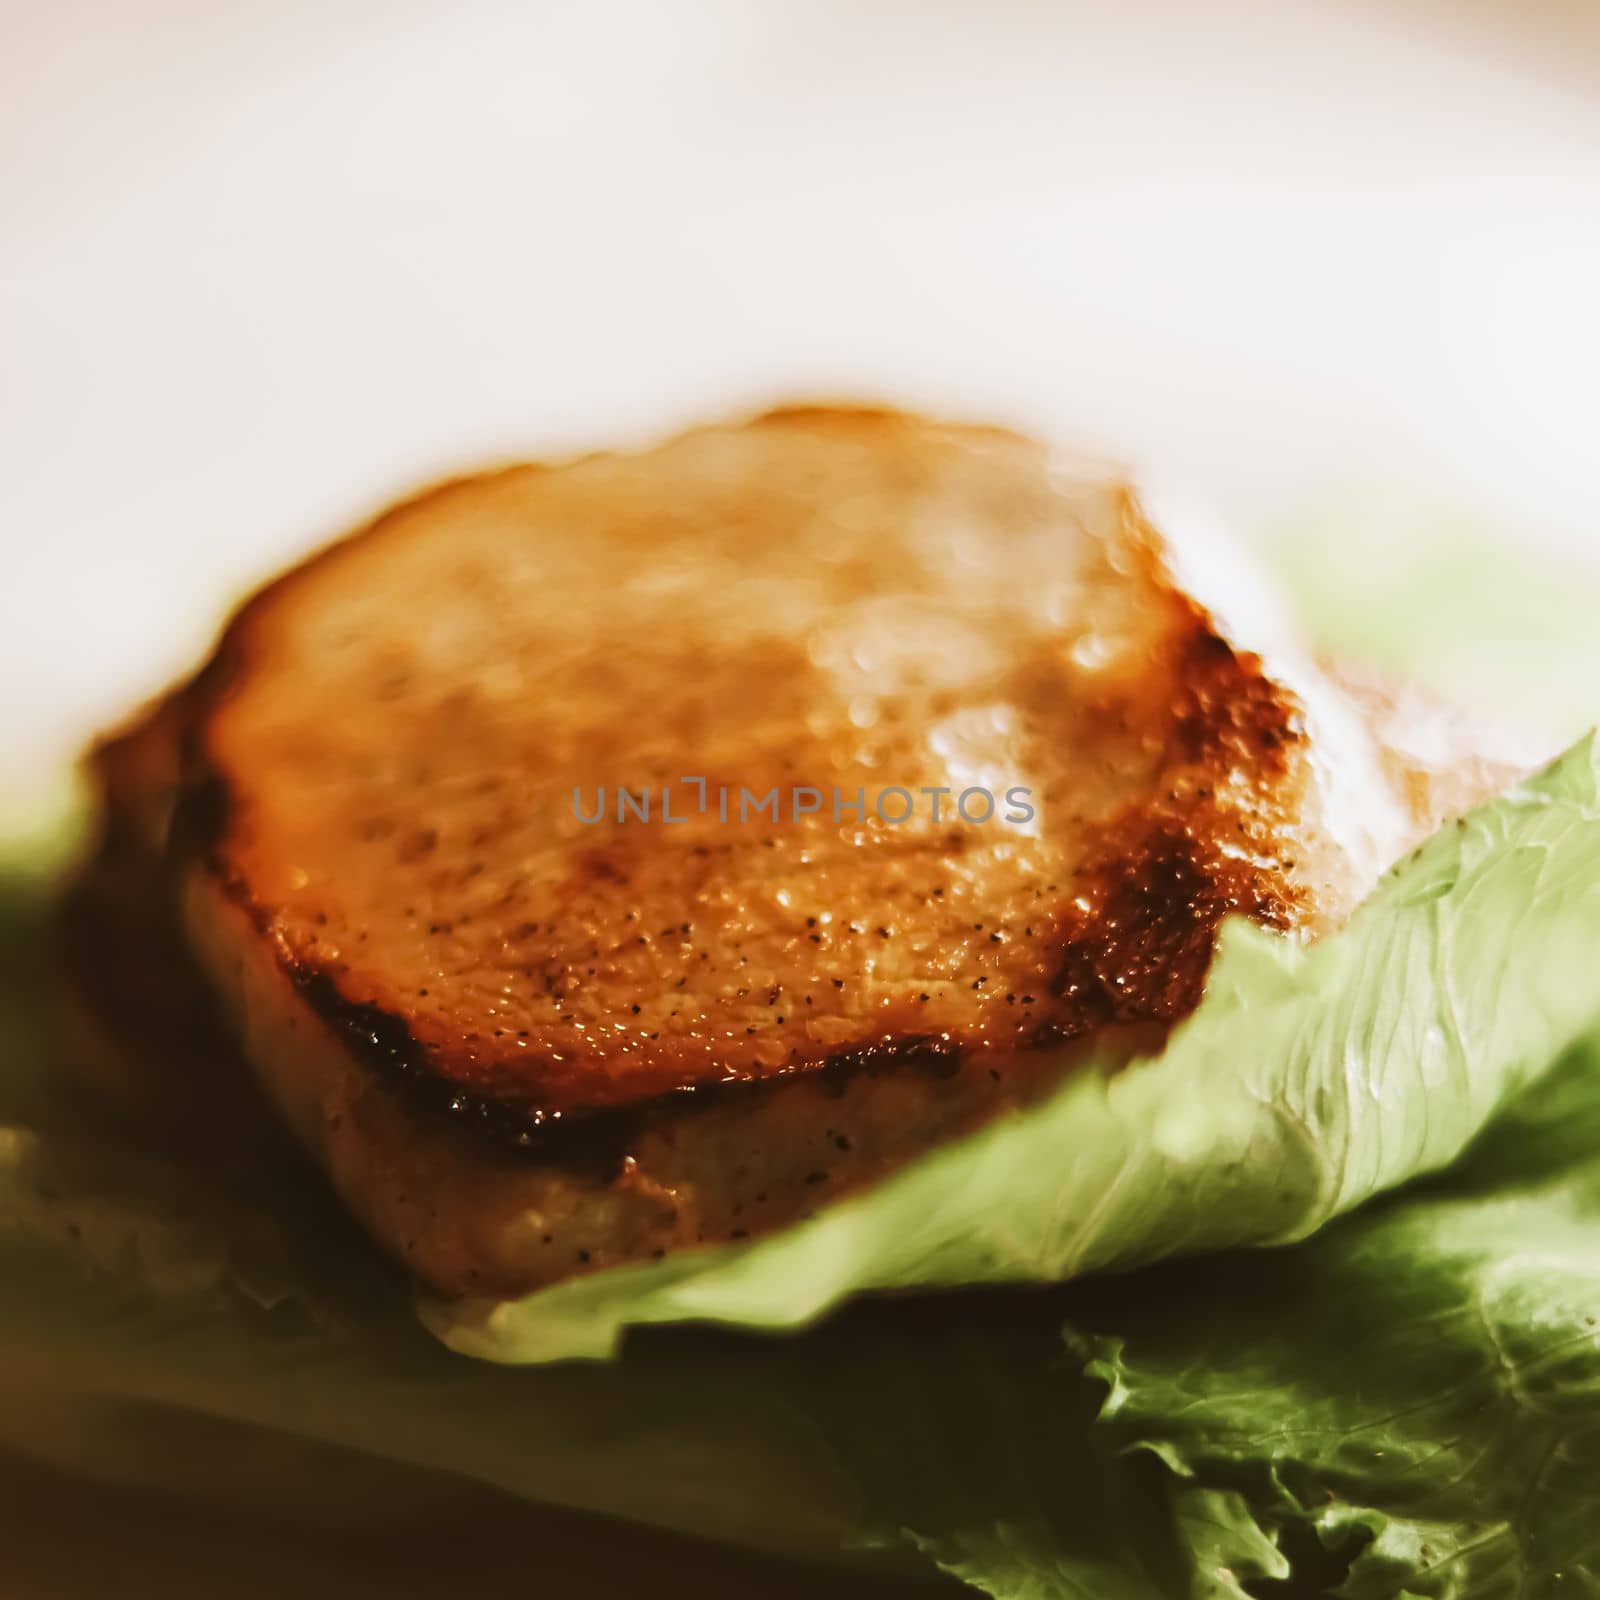 Food and diet, fried pork fillet with lettuce as meal for lunch or dinner, tasty recipe idea